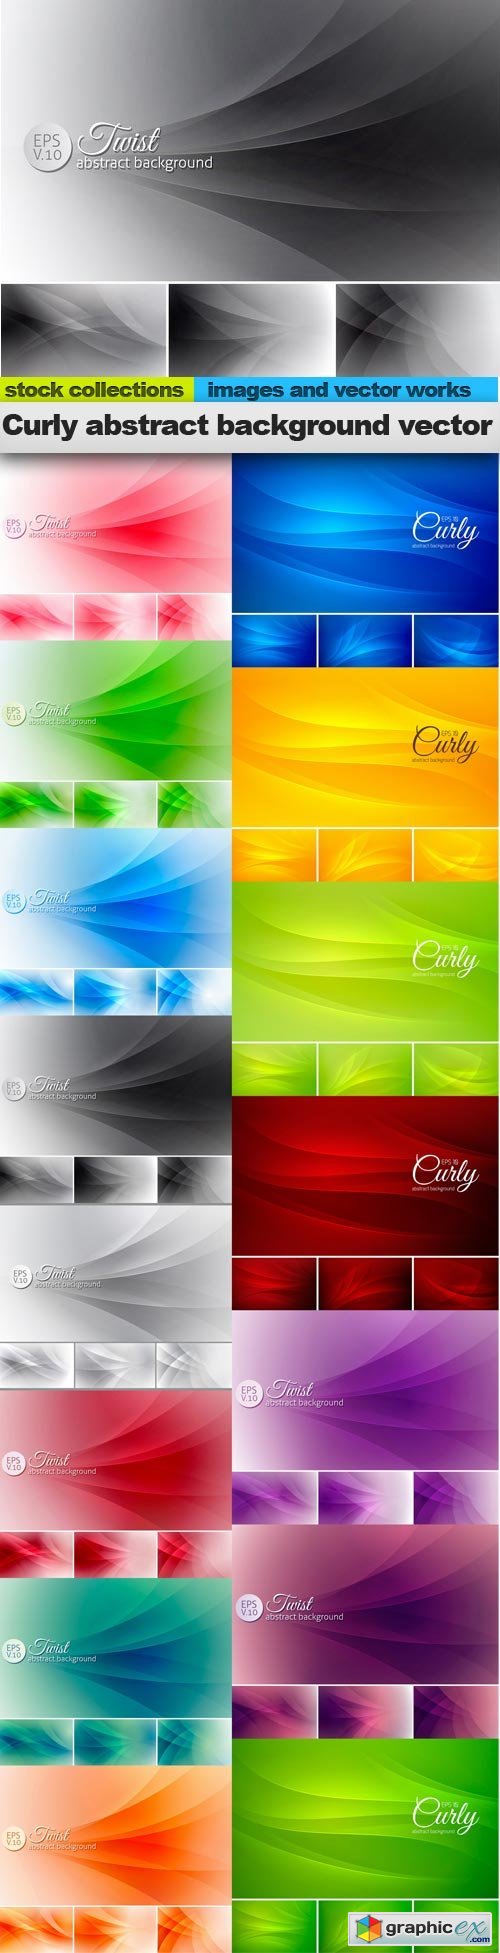 Curly abstract background vector, 15 x EPS